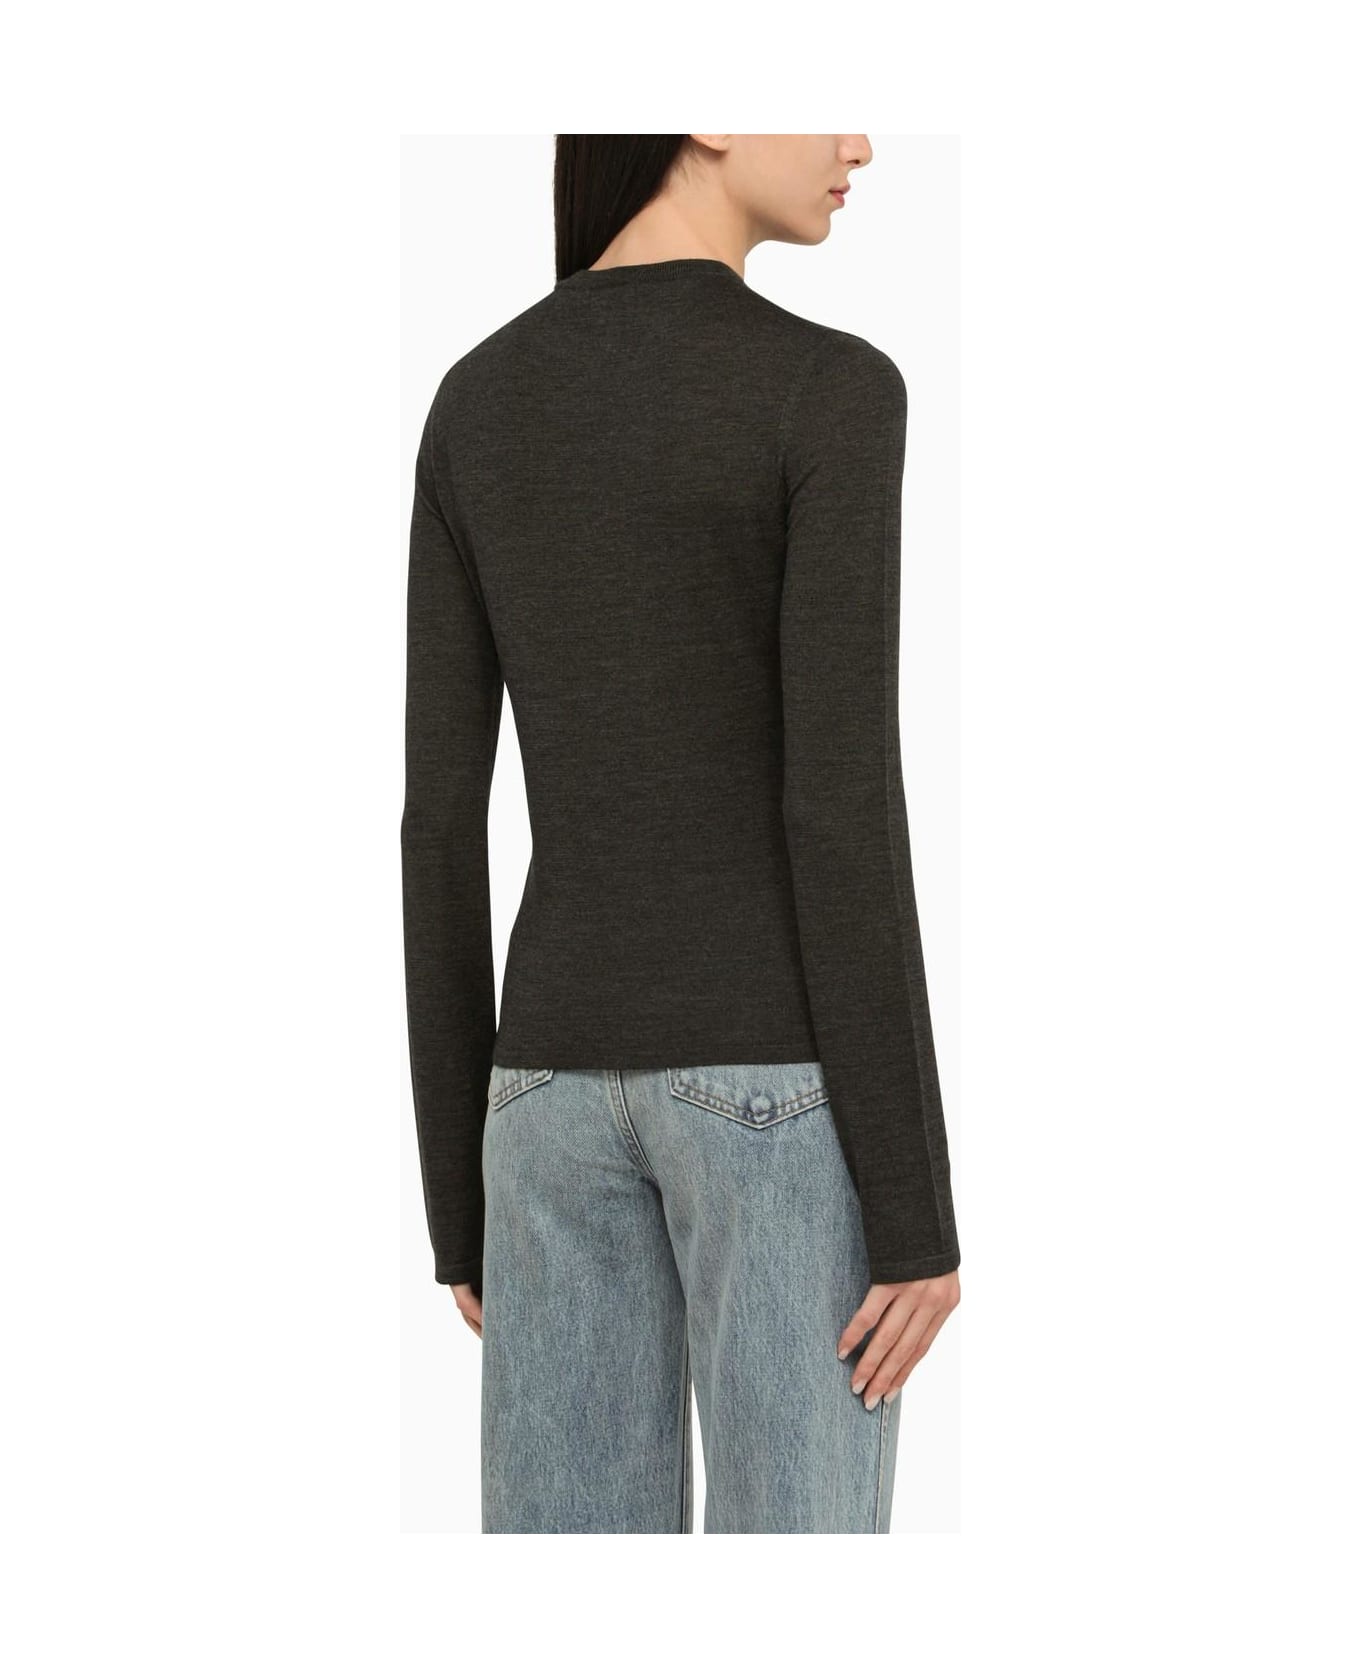 Saint Laurent Sweater In Cashmere, Wool And Silk - ANTRACITE